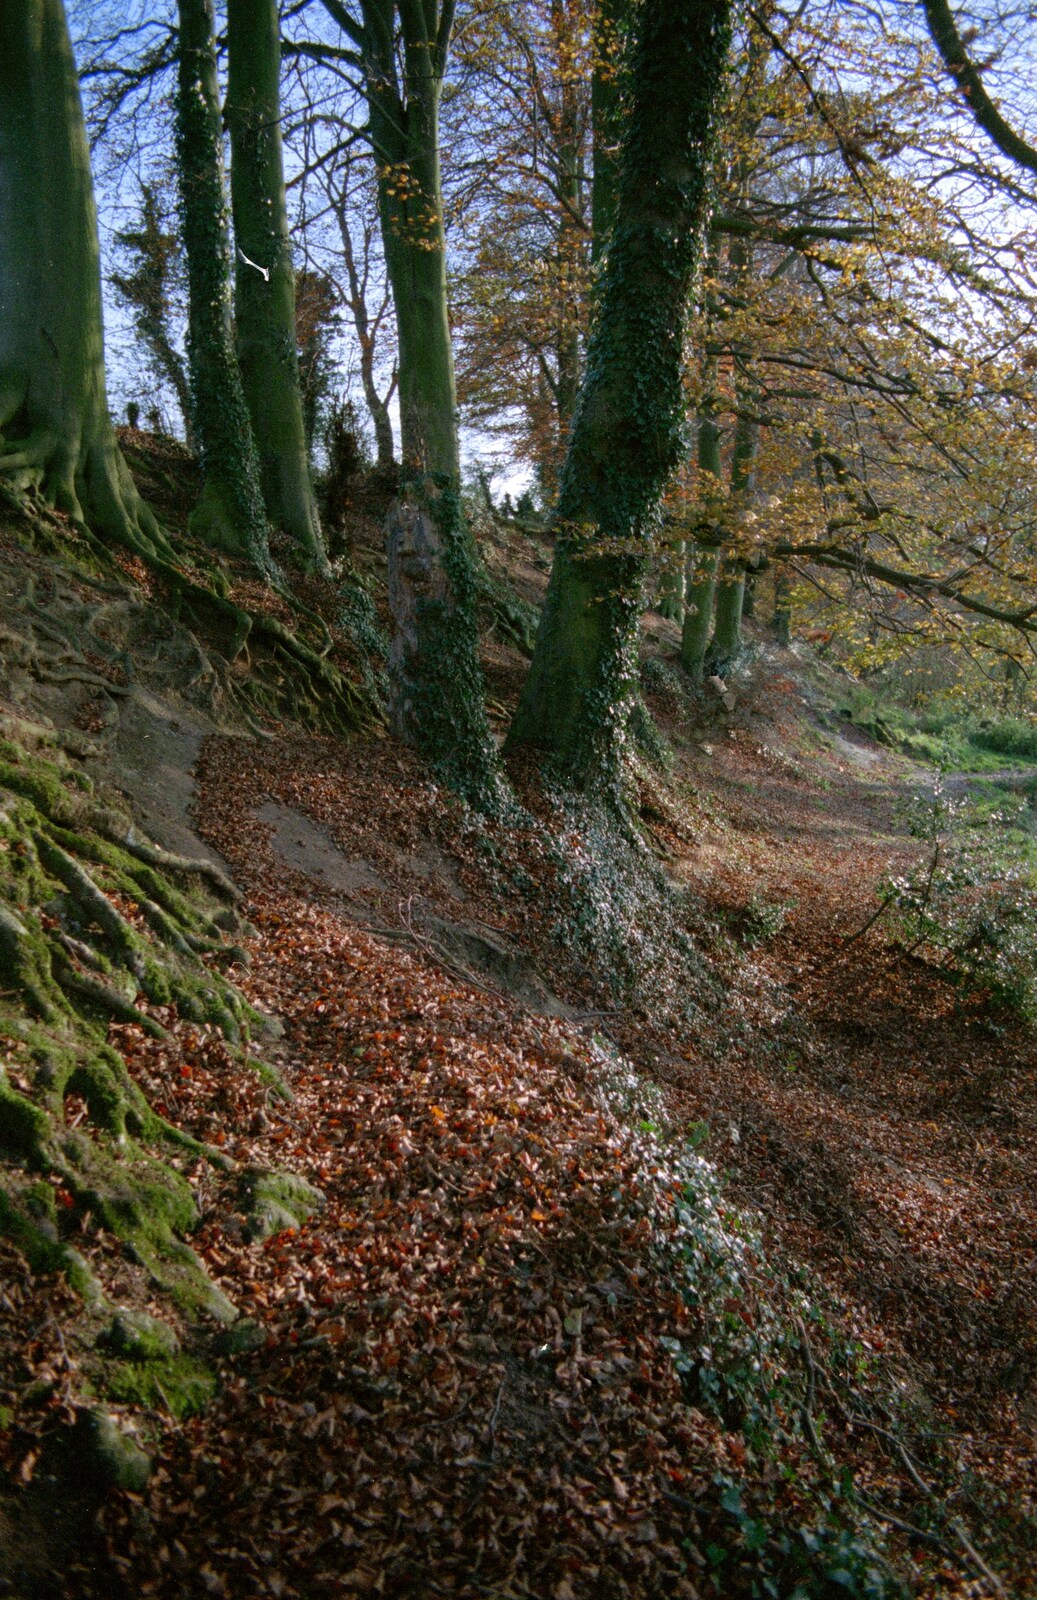 More woodland scenes from Sean Visits and a Trip to Costessey, Norwich, Norfolk - 14th October 1987